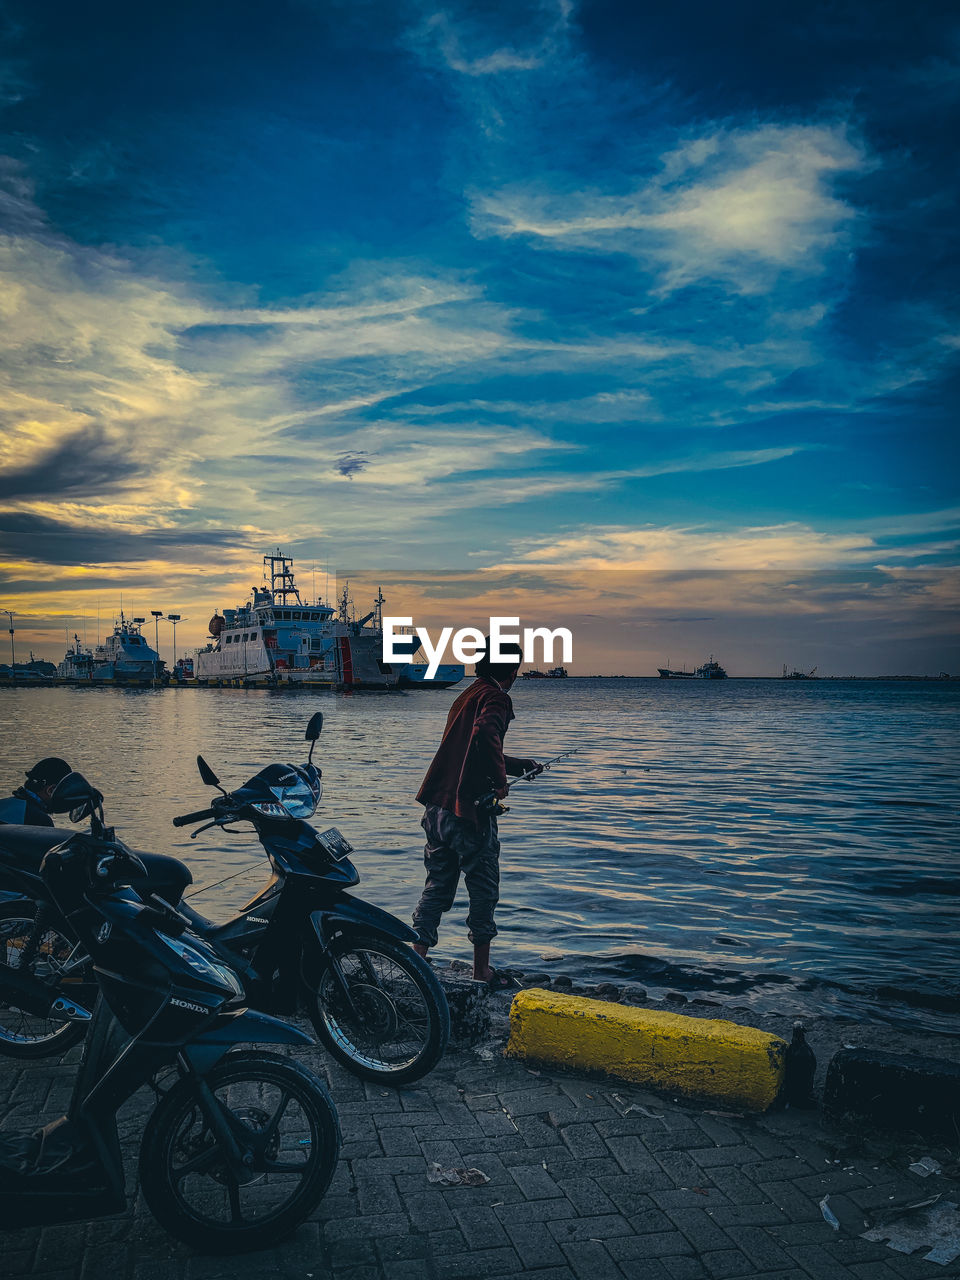 water, sky, transportation, bicycle, sea, cloud, mode of transportation, sunset, blue, nature, beach, evening, full length, horizon, vehicle, ocean, one person, land, dusk, travel, city, activity, beauty in nature, men, adult, nautical vessel, cycling, reflection, lifestyles, outdoors, architecture, scenics - nature, standing, coast, person, travel destinations, leisure activity, sunlight, land vehicle, bicycle wheel, sports, vacation, side view, horizon over water